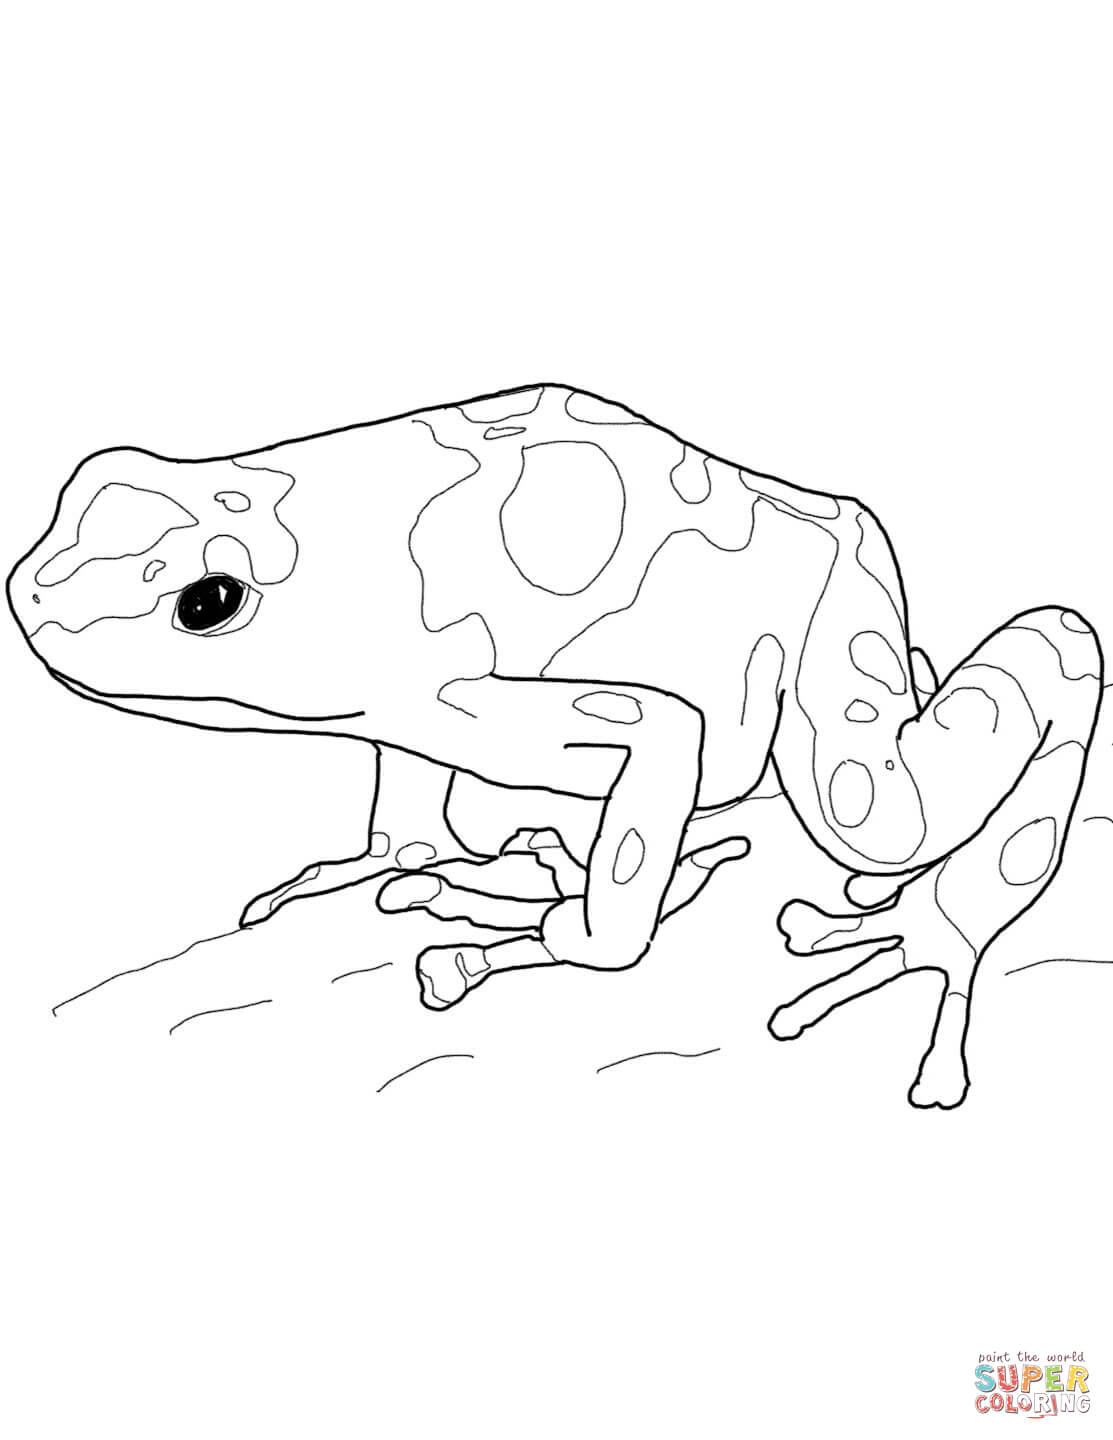 Rainforest Frog Coloring Page Yellow Banded Poison Dart Frog Coloring Page Free Printable